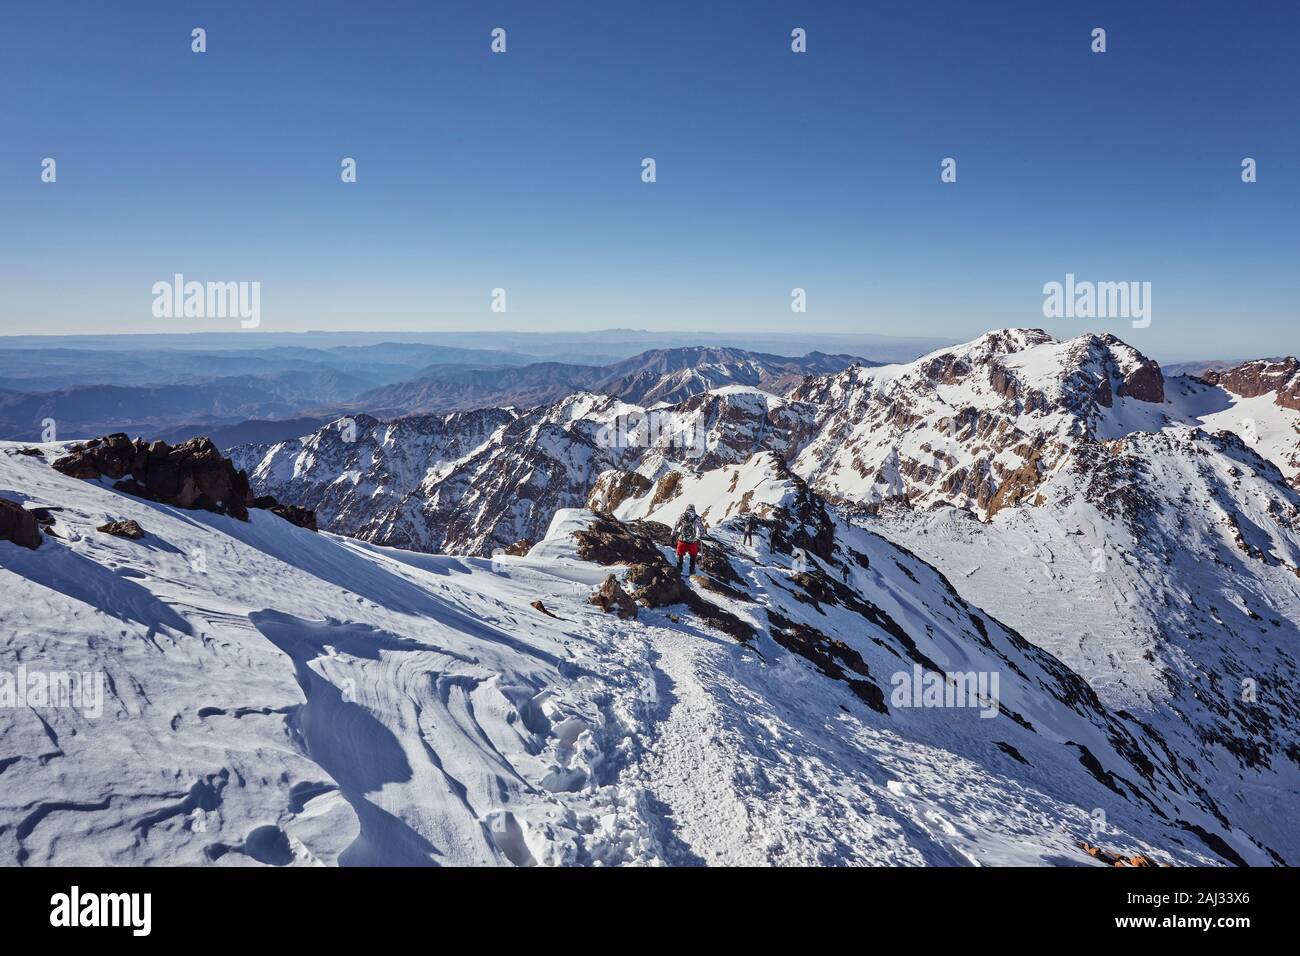 Toubkal national park, Morocco seen from Jebel Toubkal highest peak of Atlas mountains and Morocco Stock Photo